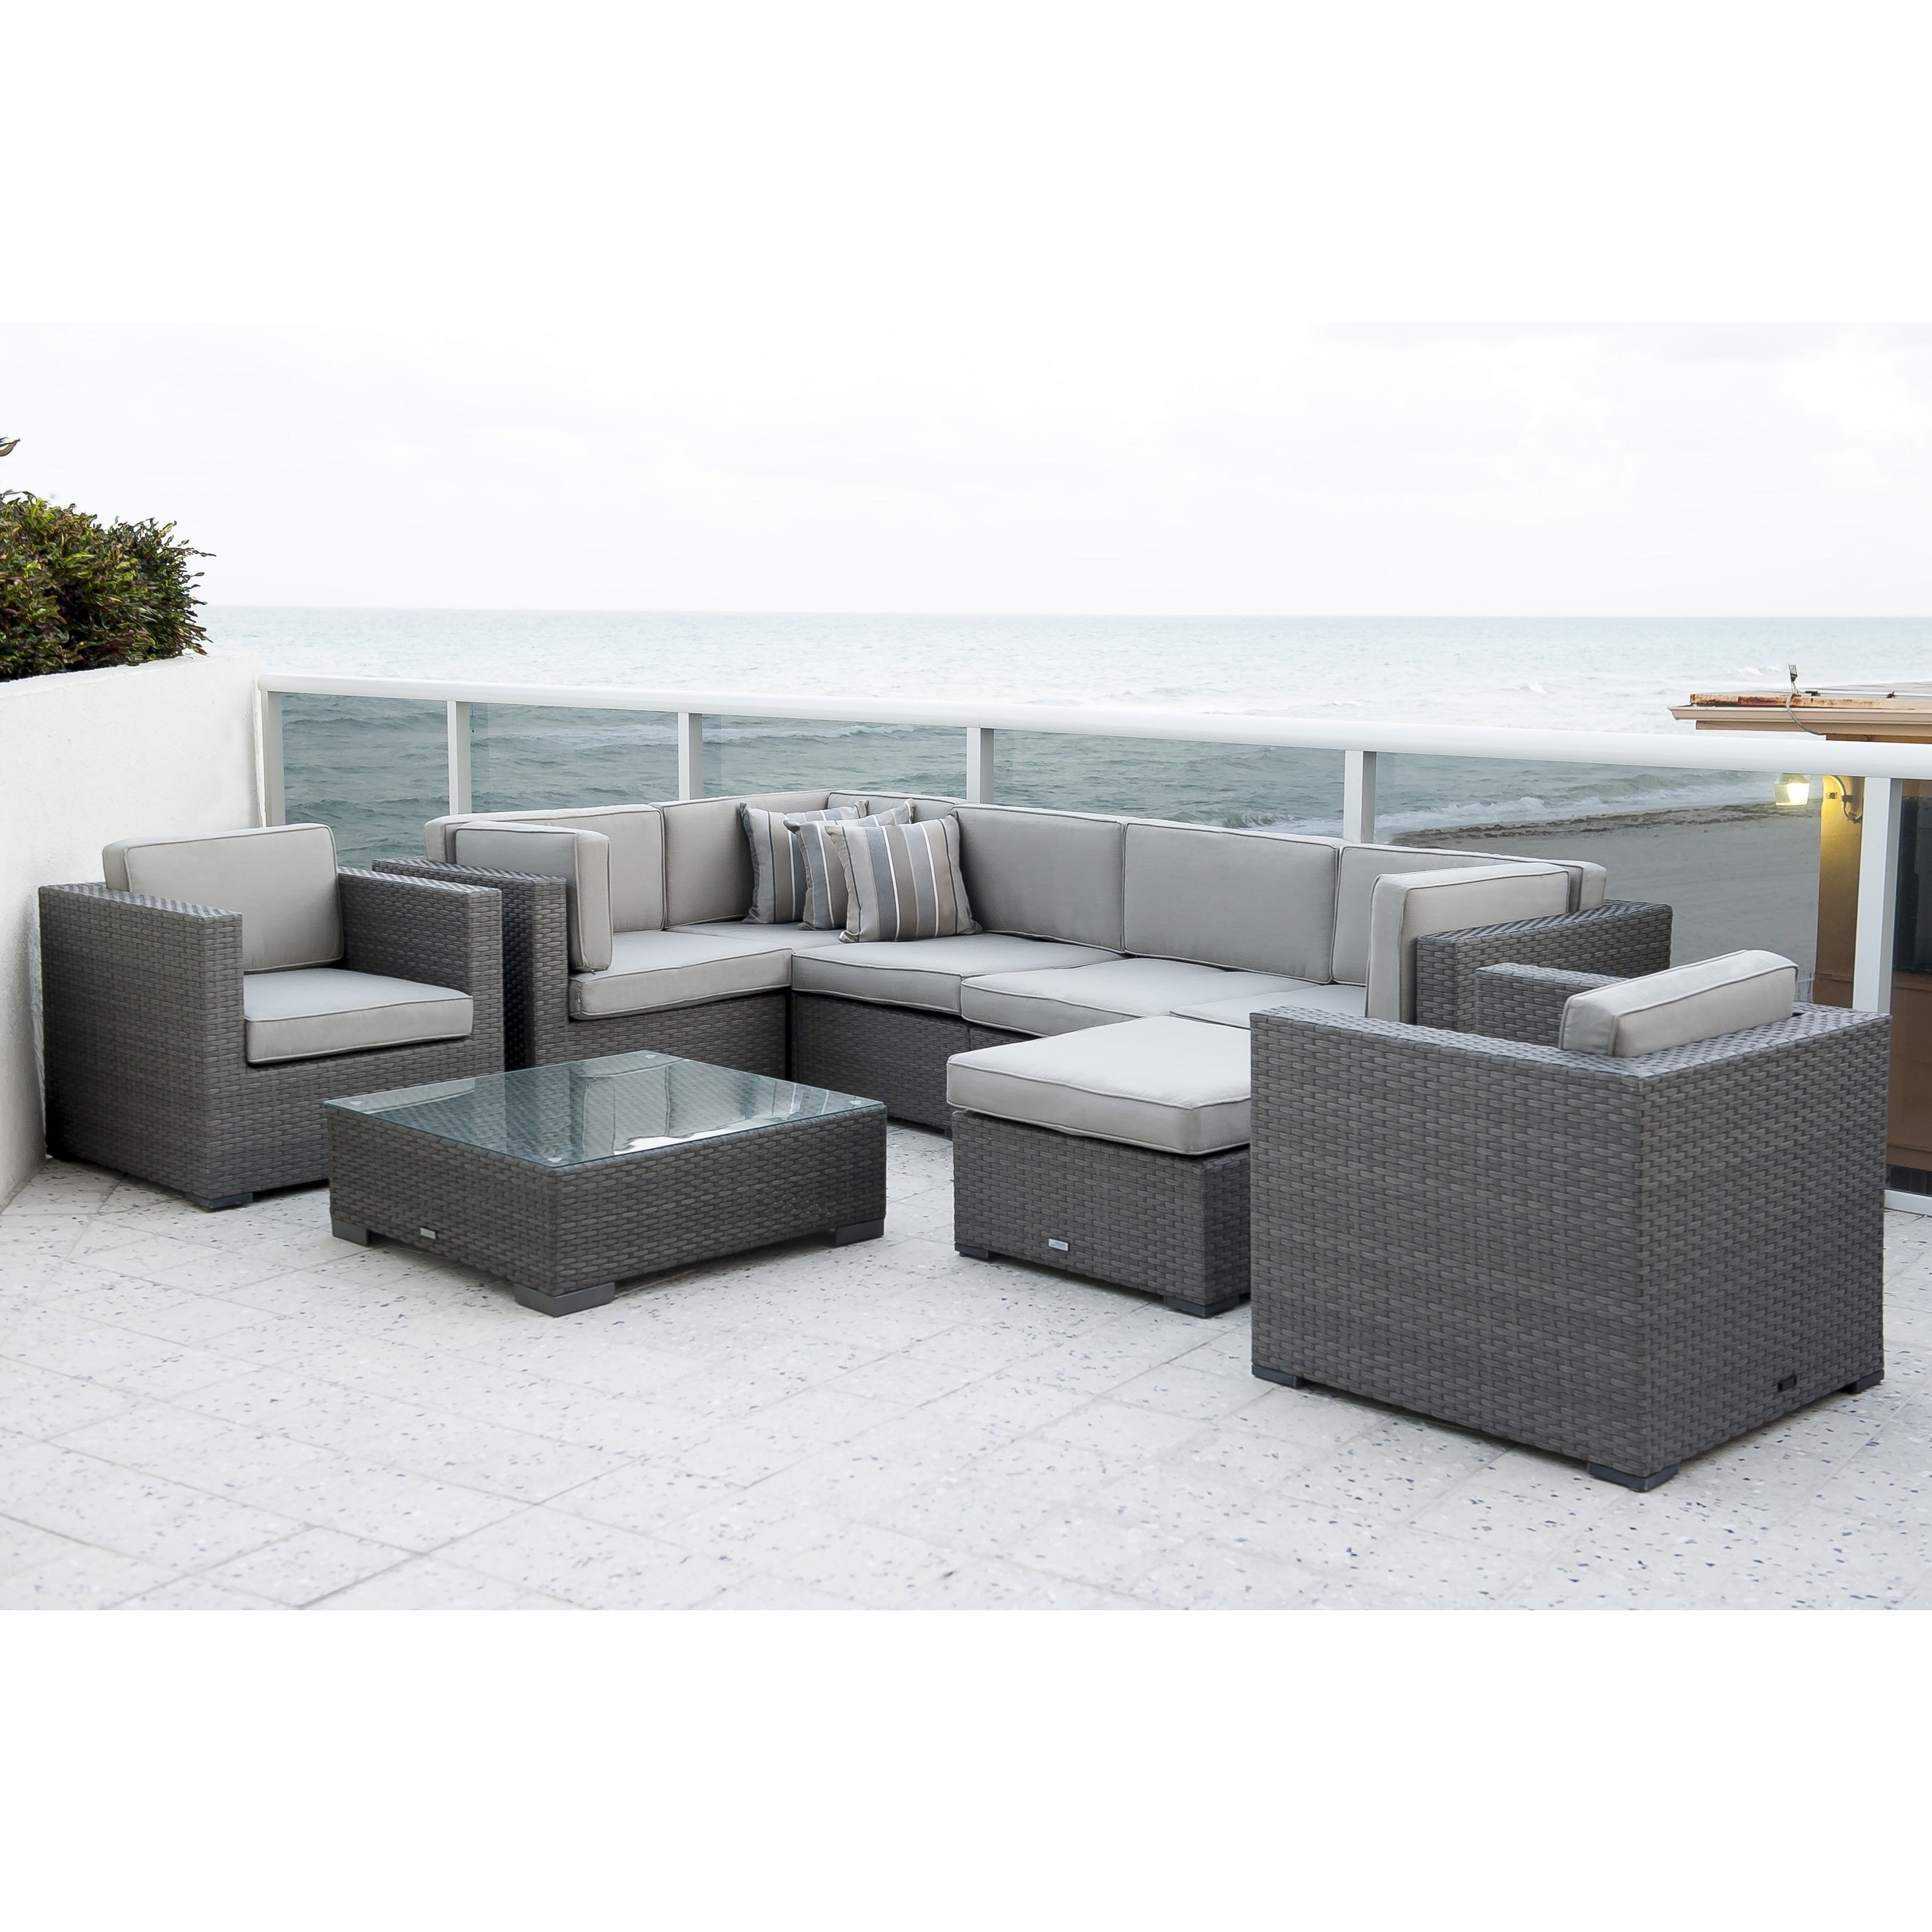 Havenside Home Fort Lauderdale 9-piece Sectional Set with Sunbrella Cushions